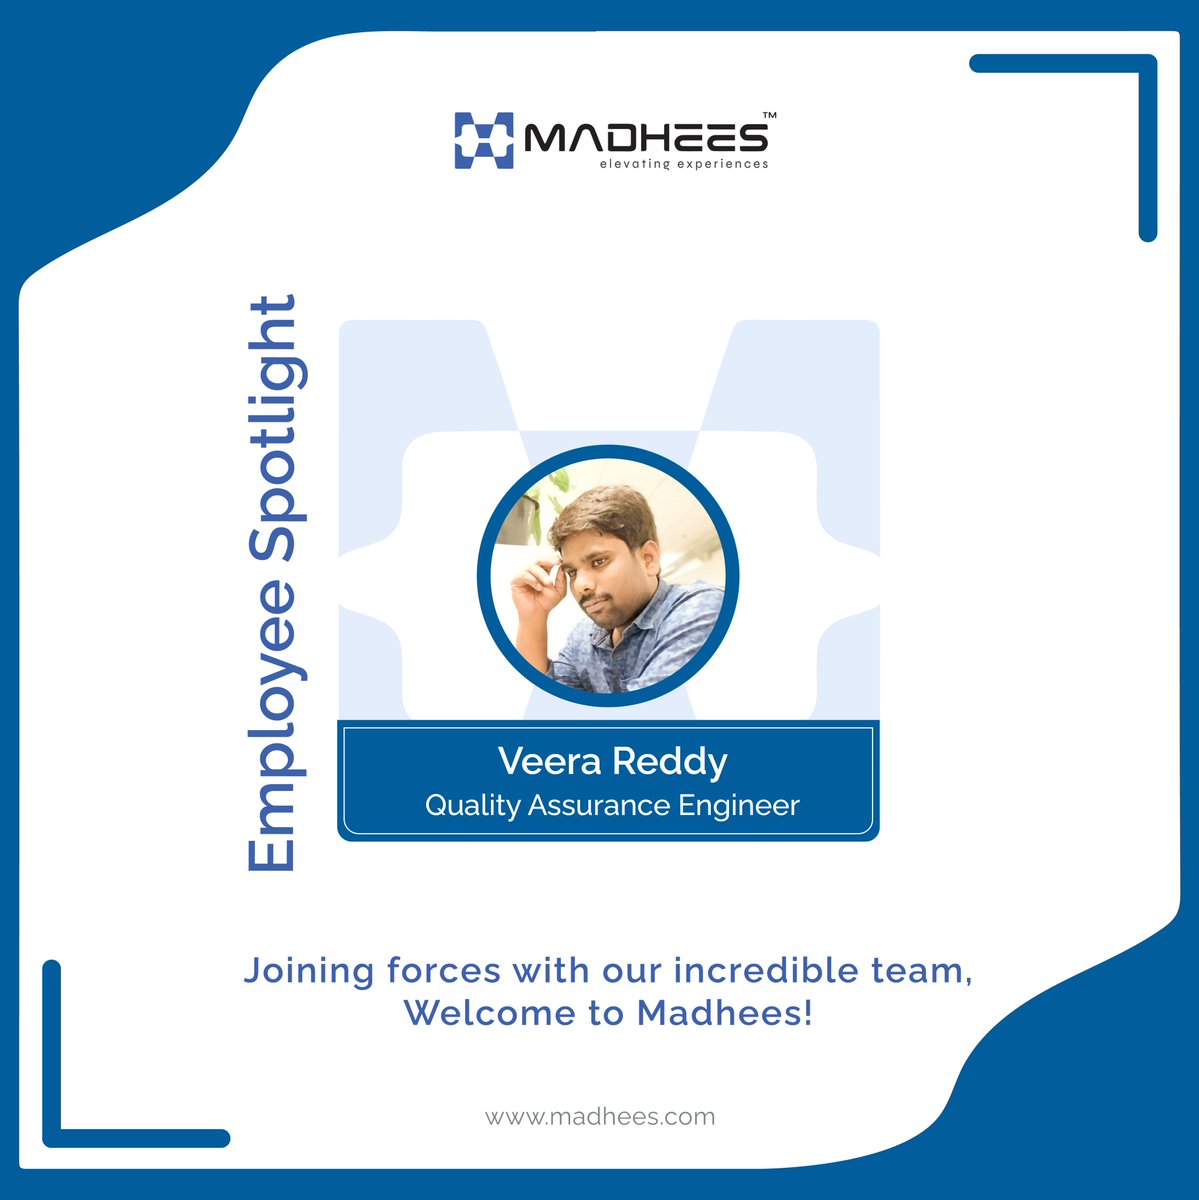 🎉 Joining forces with the best! 🤝 Let's extend a warm welcome to our newest team member Veera Reddy! Together, we'll soar to new heights! ✨

#team #newjoinee #teammadhees #spotlight #team #teambuilding #employees